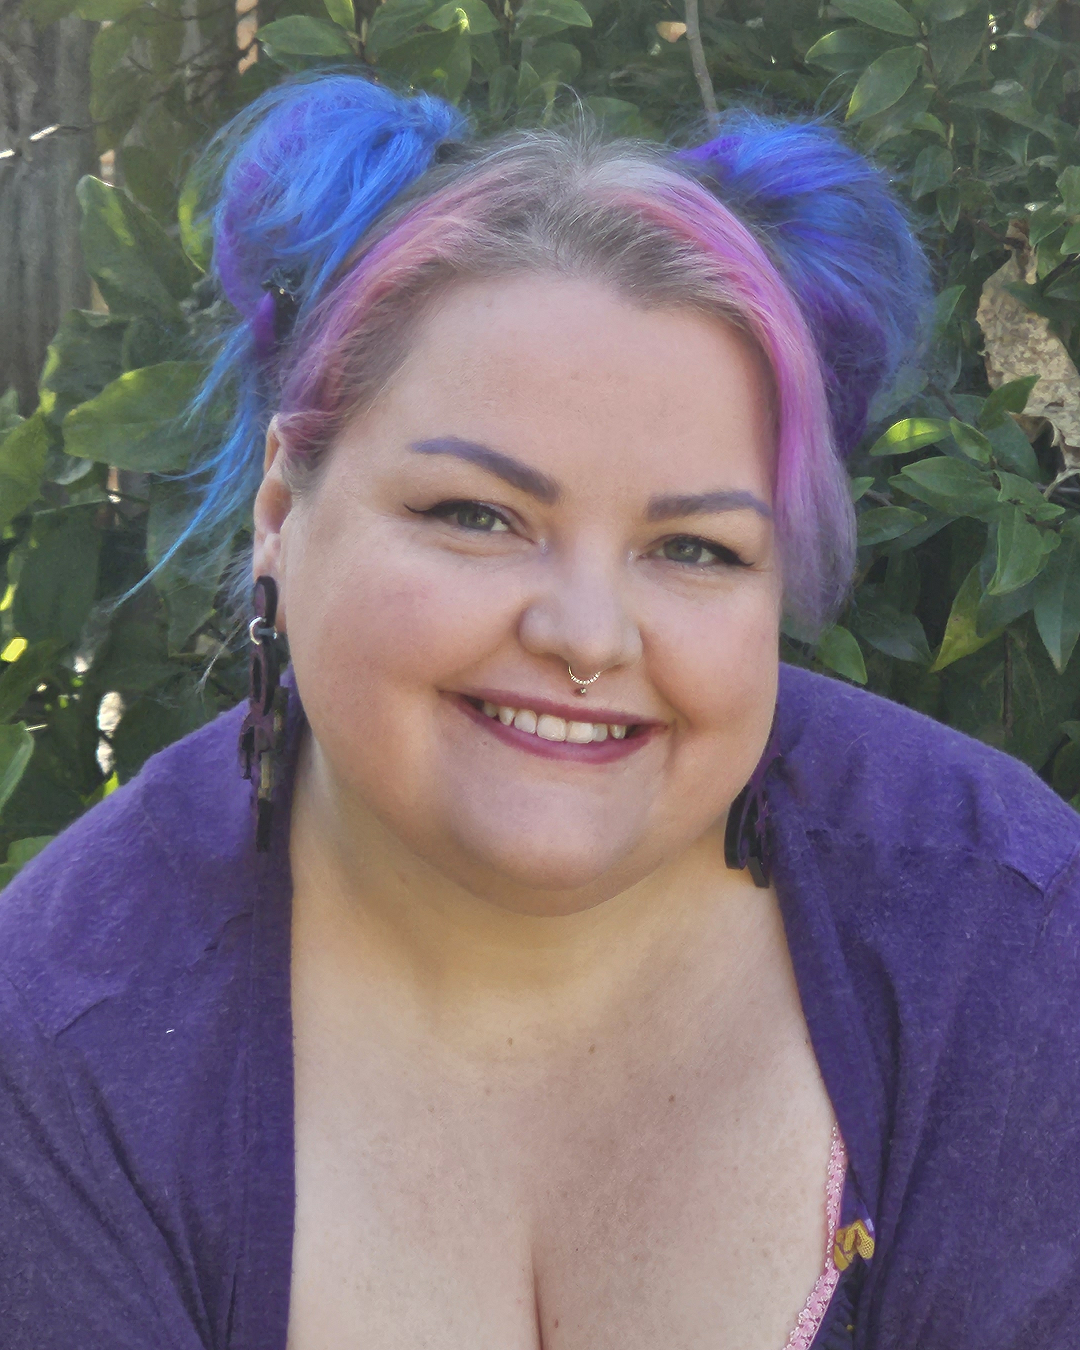 Plus sized girl with pink and purple hear wearing a purple care bears dress